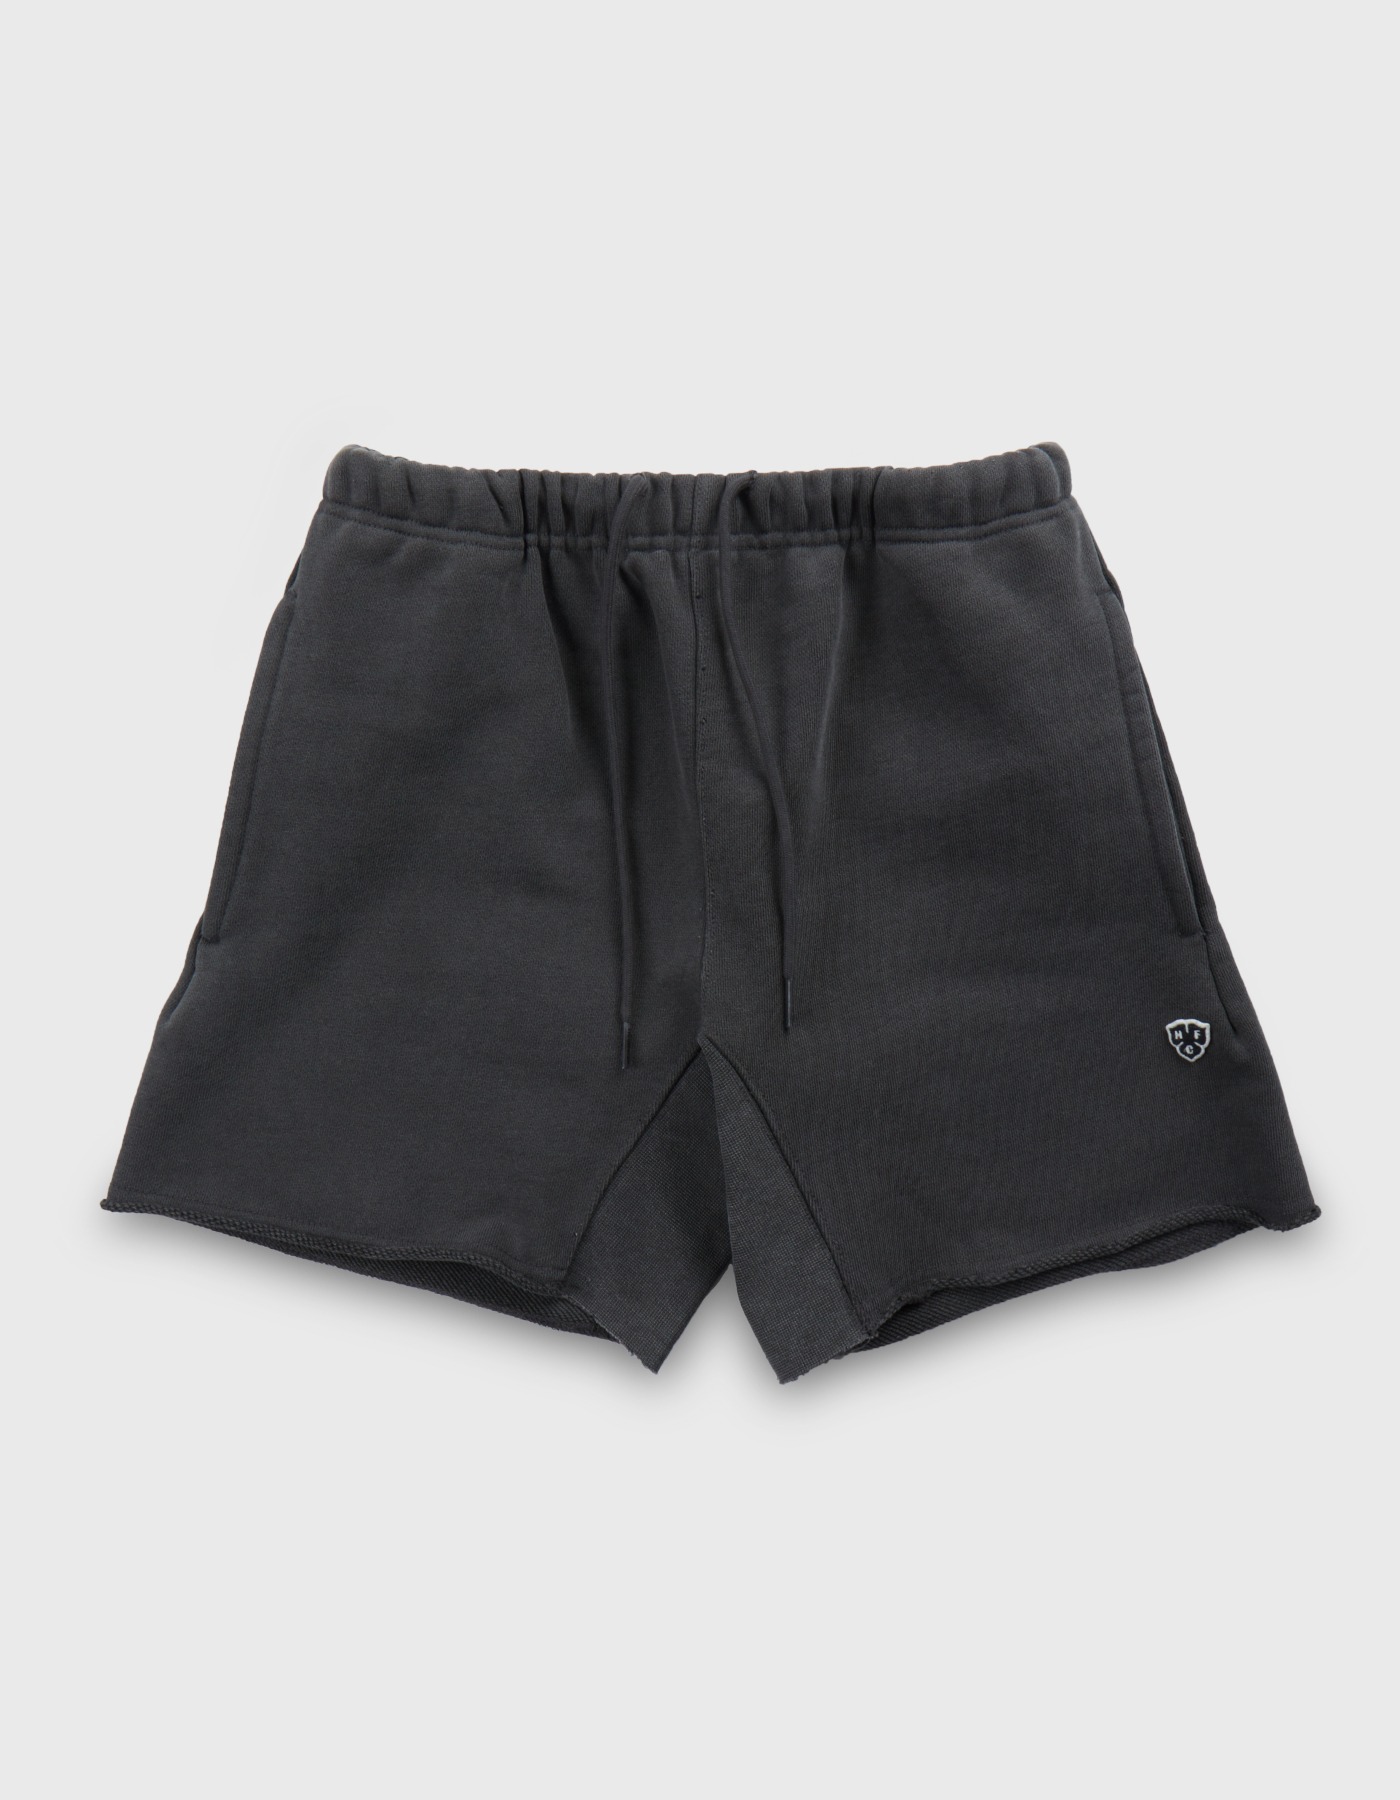 321 PIGMENT GYM SHORTS / Charcoal